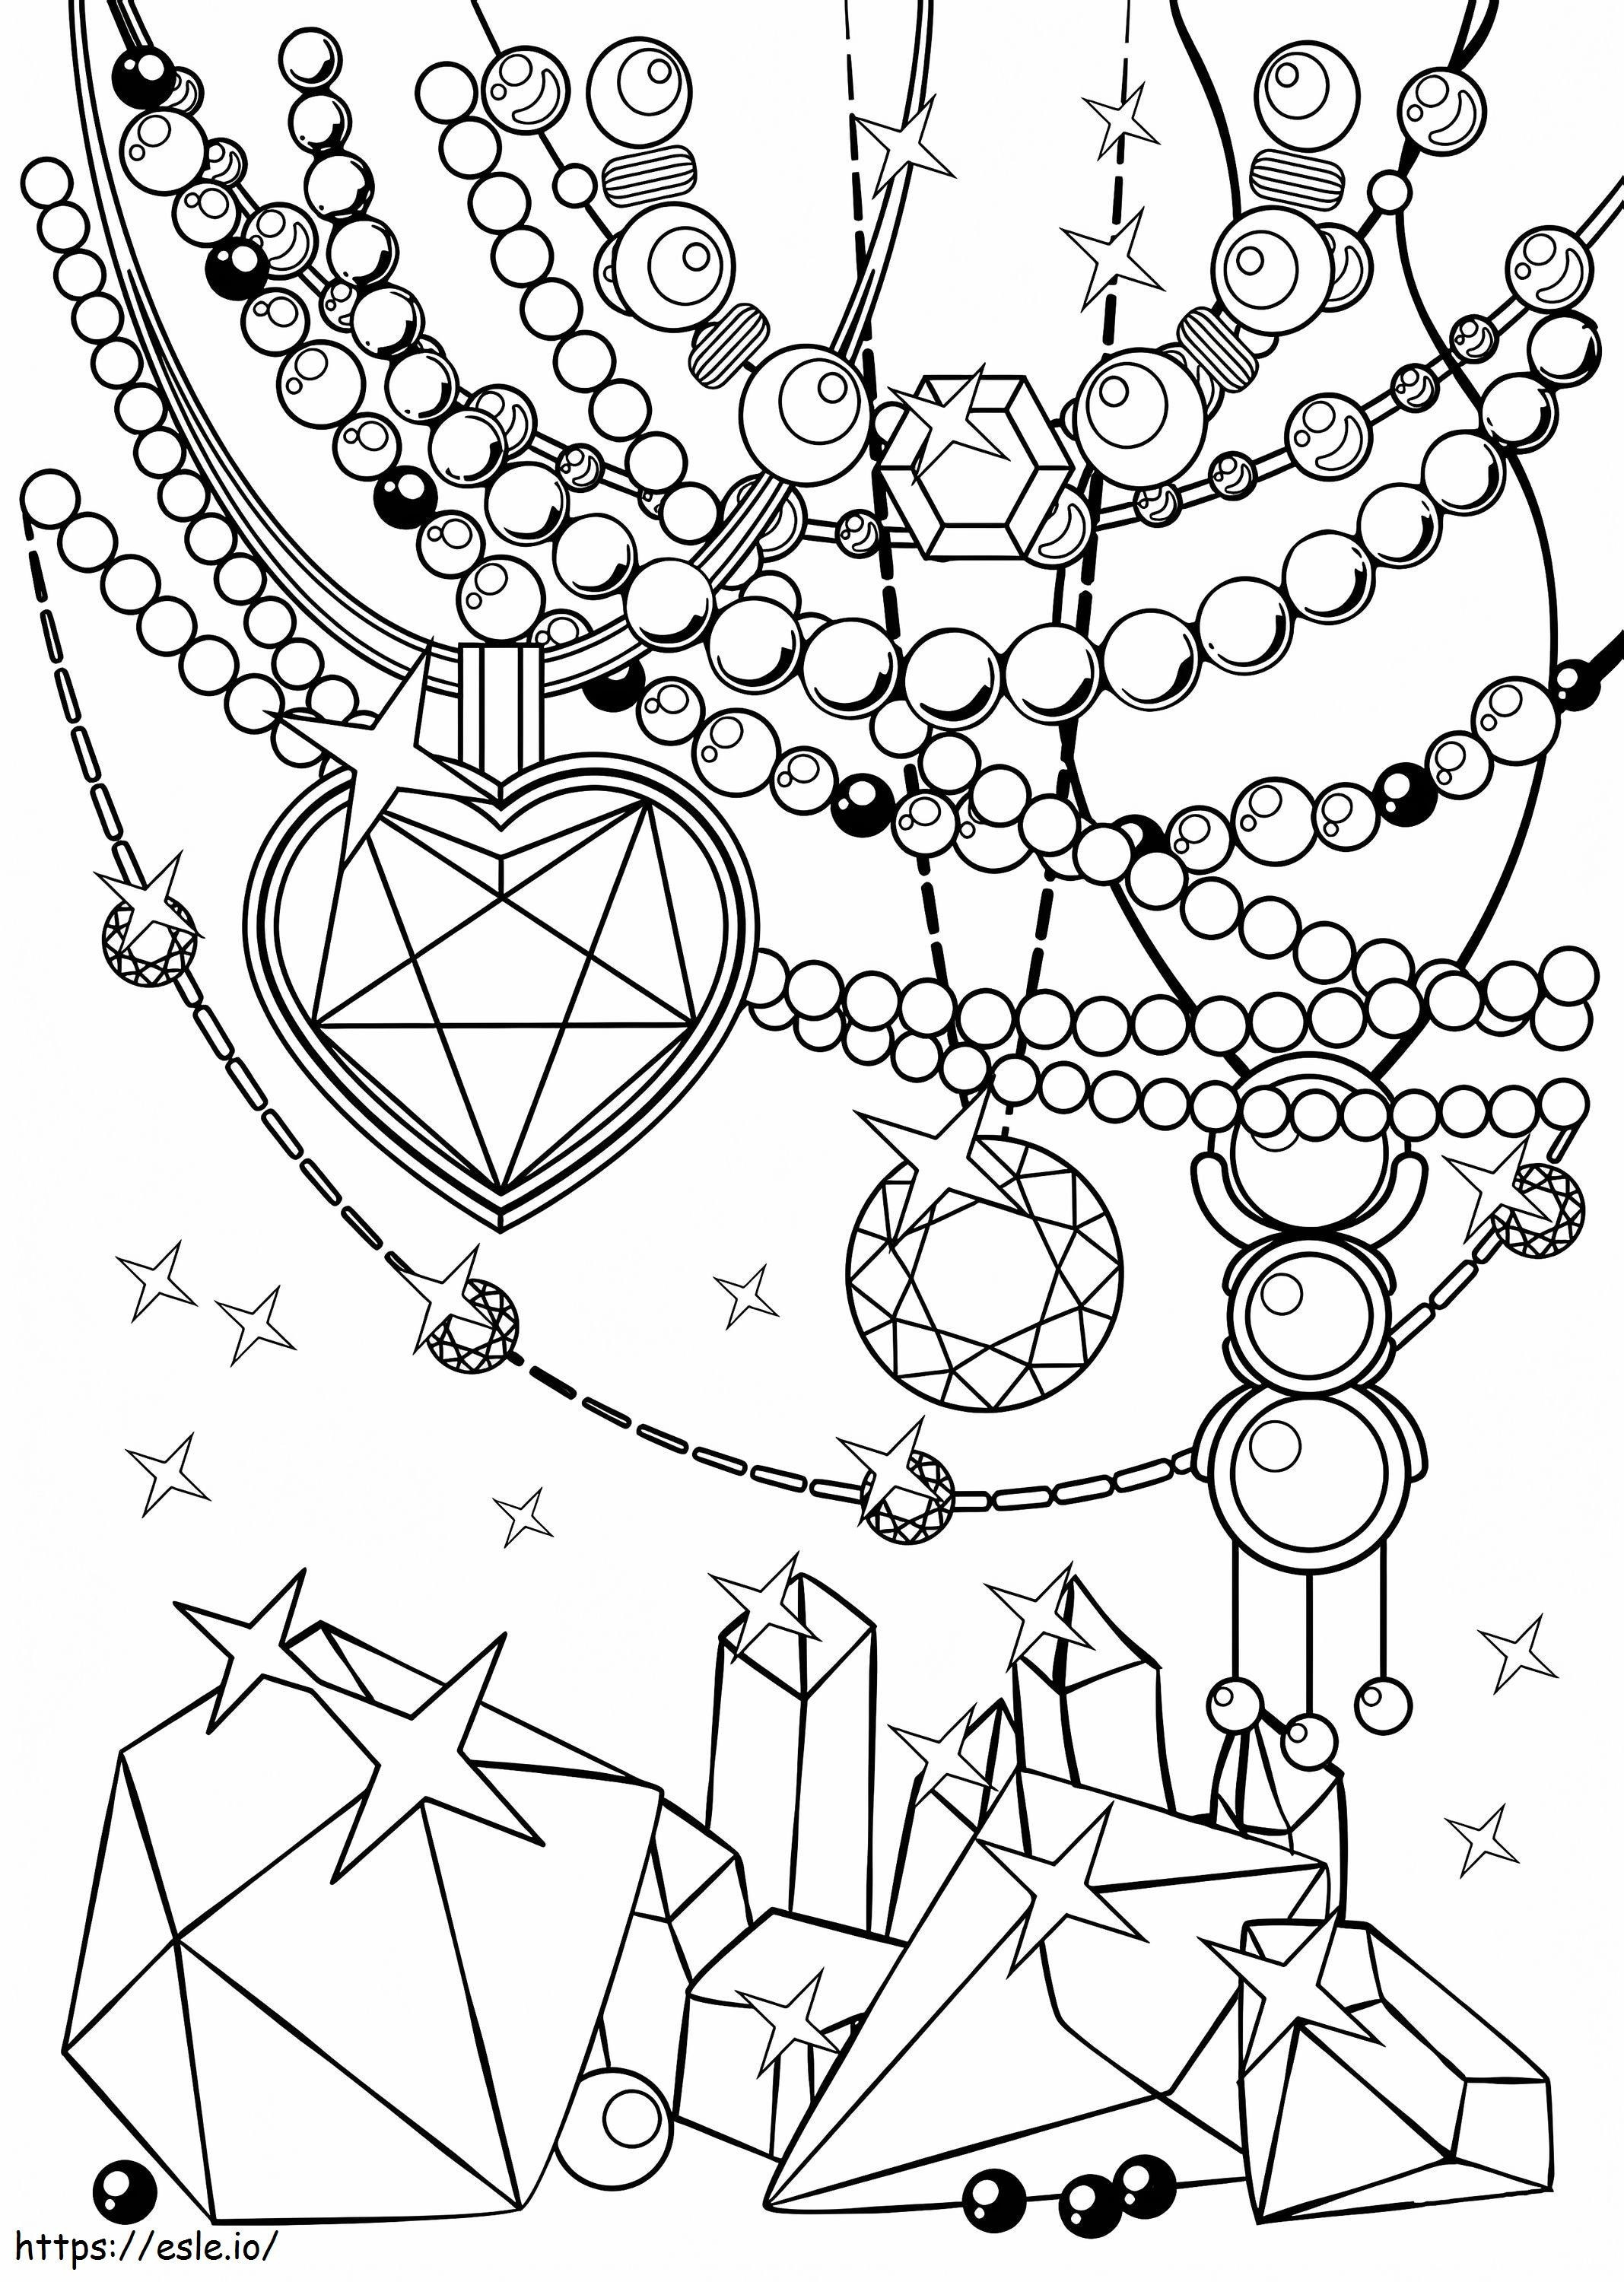 Beads And Crystals coloring page